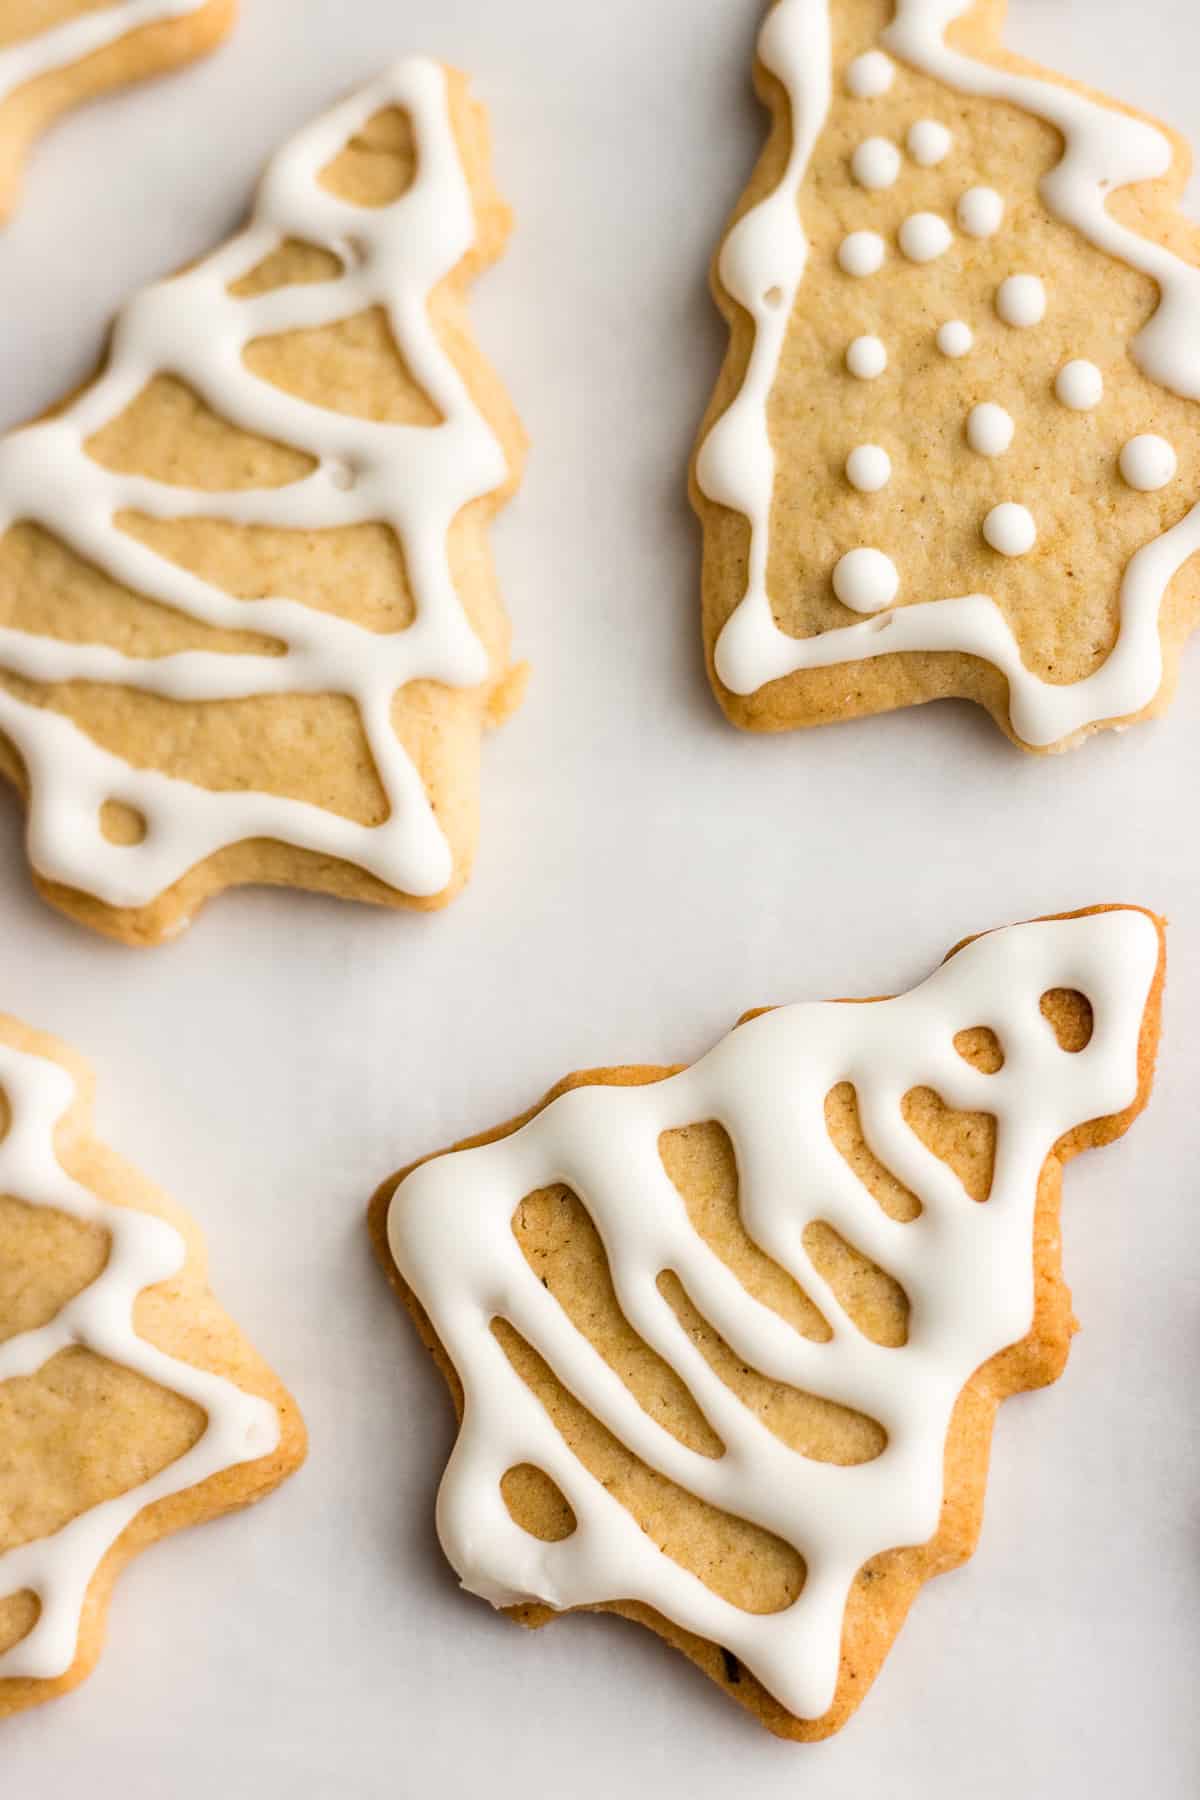 Ginger cookies in the shape of Christmas trees, with white icing on them.